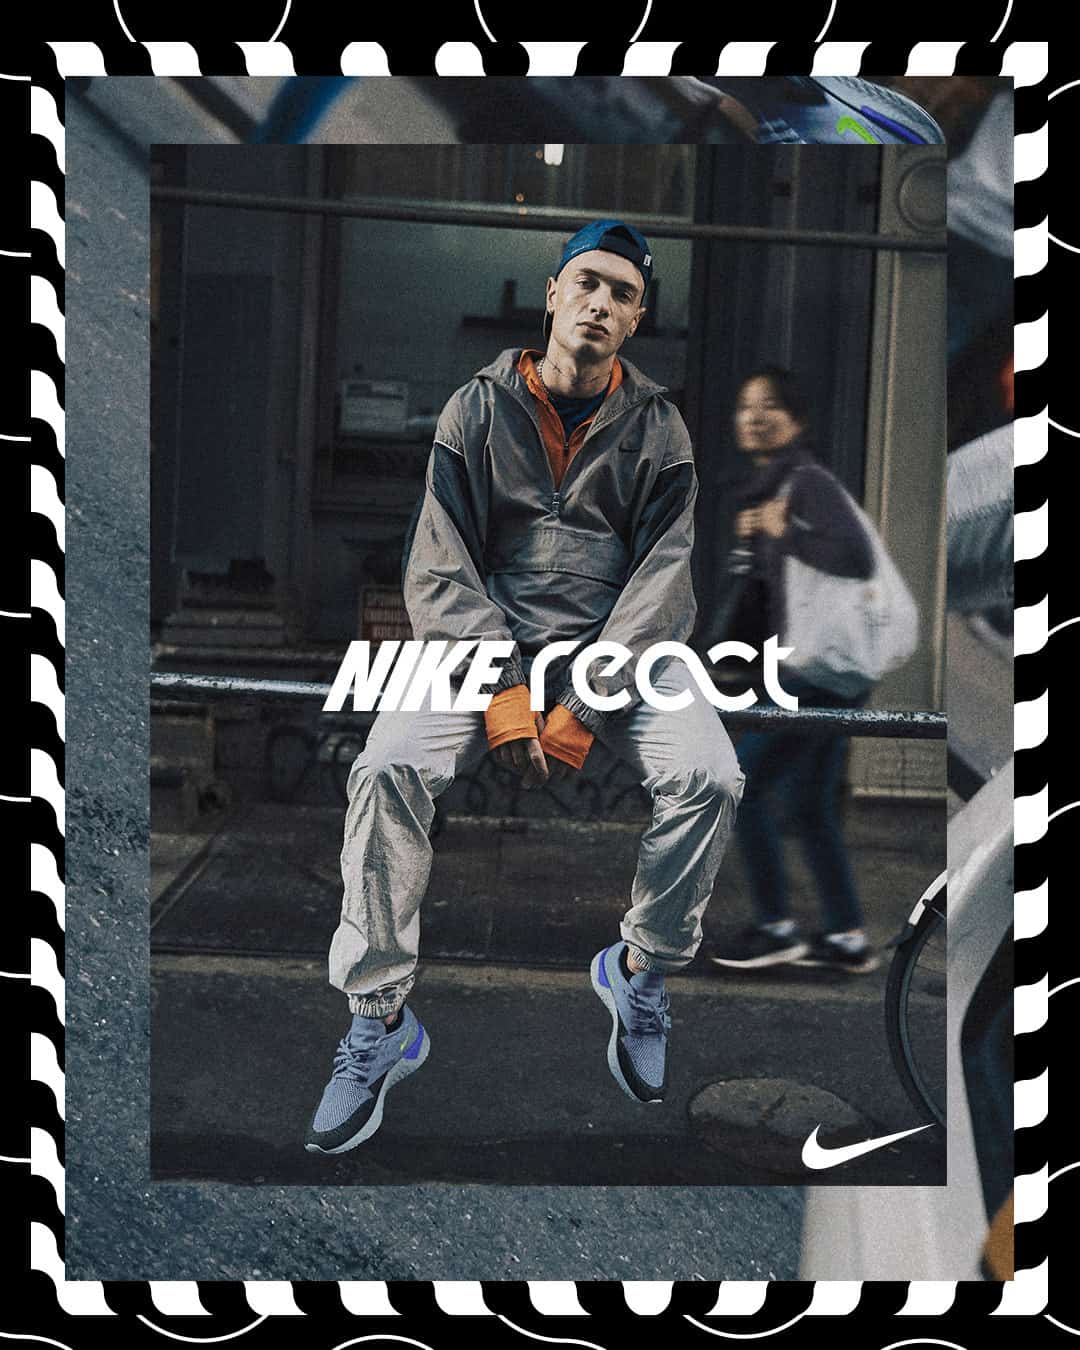 Tran La x Conscious Minds – Nike React IG Typographic Poster Campaign 7